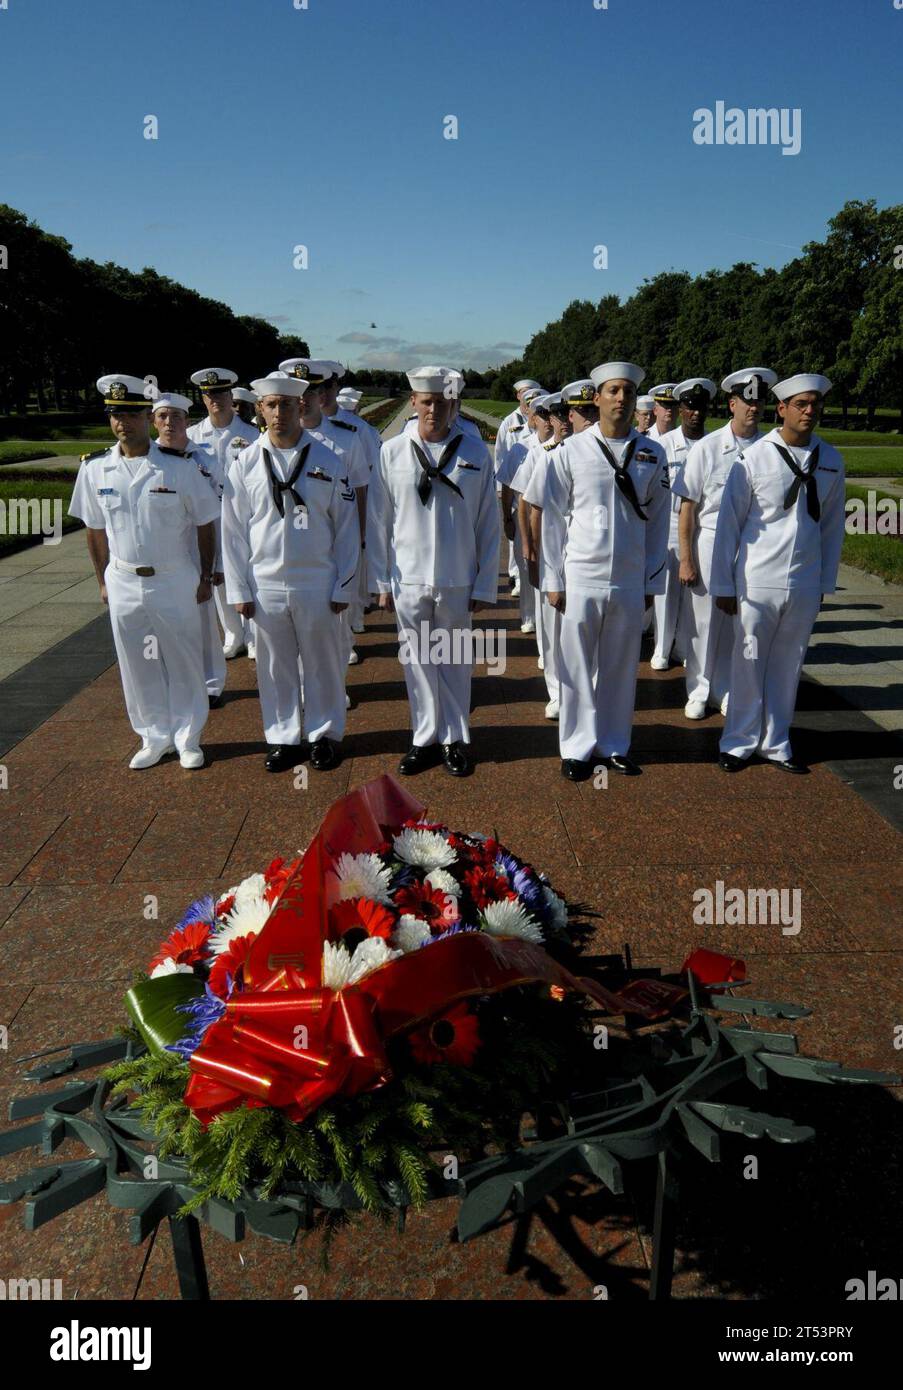 ceremony, Consulate General of the United States of America, Piskarevskoye Cemetery, Russia, Sailors, Sheila Gwaltney, St. Petersburg, USS Carr (FFG 52), wreath laying Stock Photo